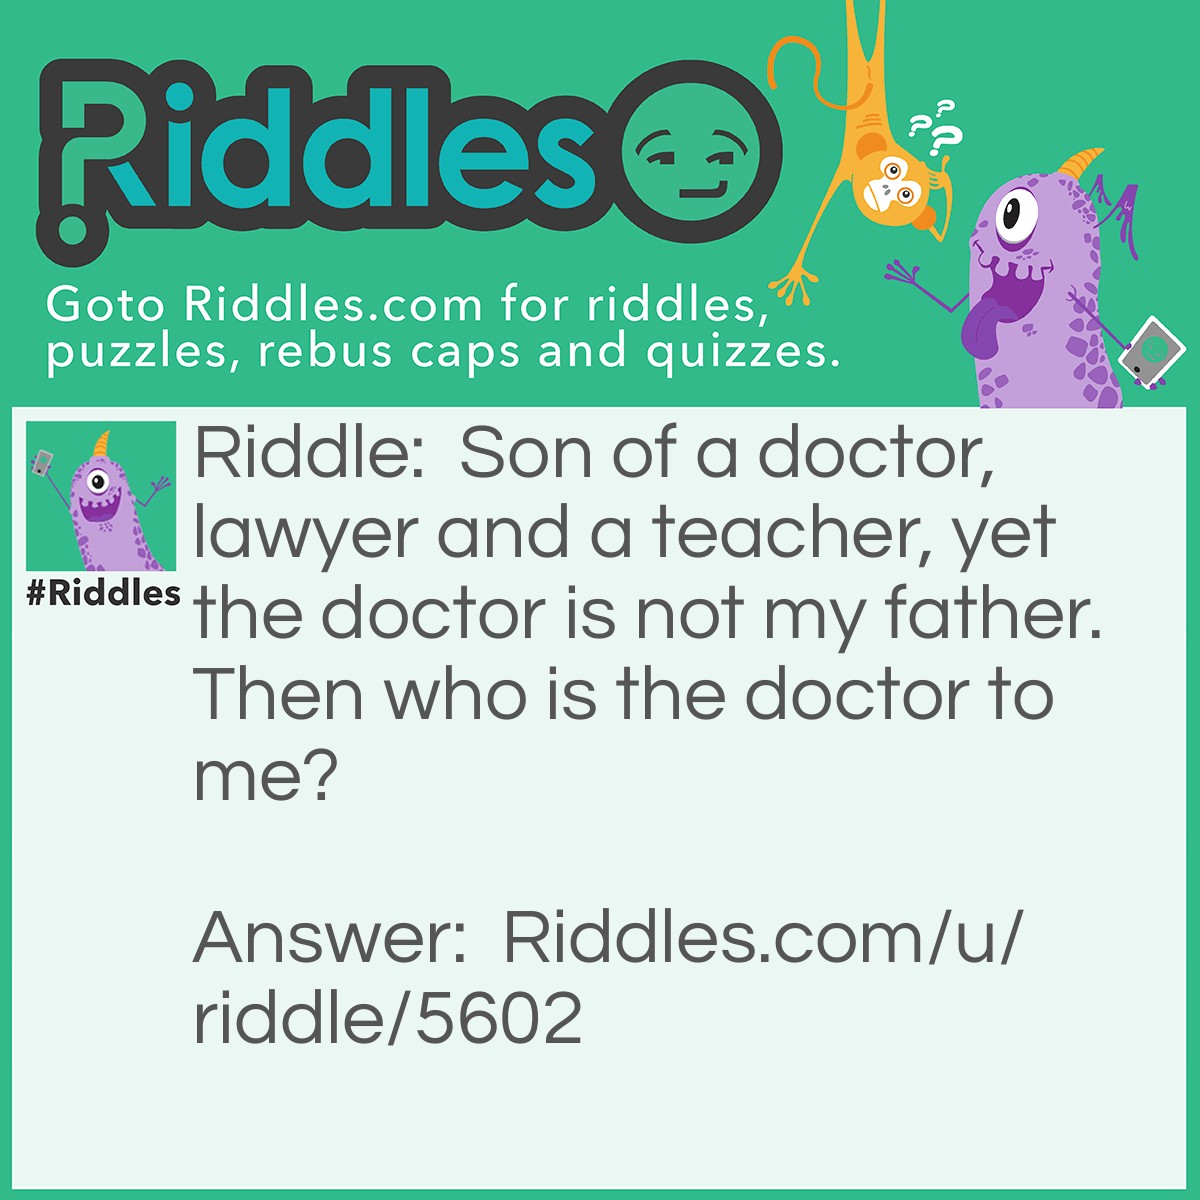 Riddle: Son of a doctor, lawyer and a teacher, yet the doctor is not my father. Then who is the doctor to me? Answer: The doctor is my mother.